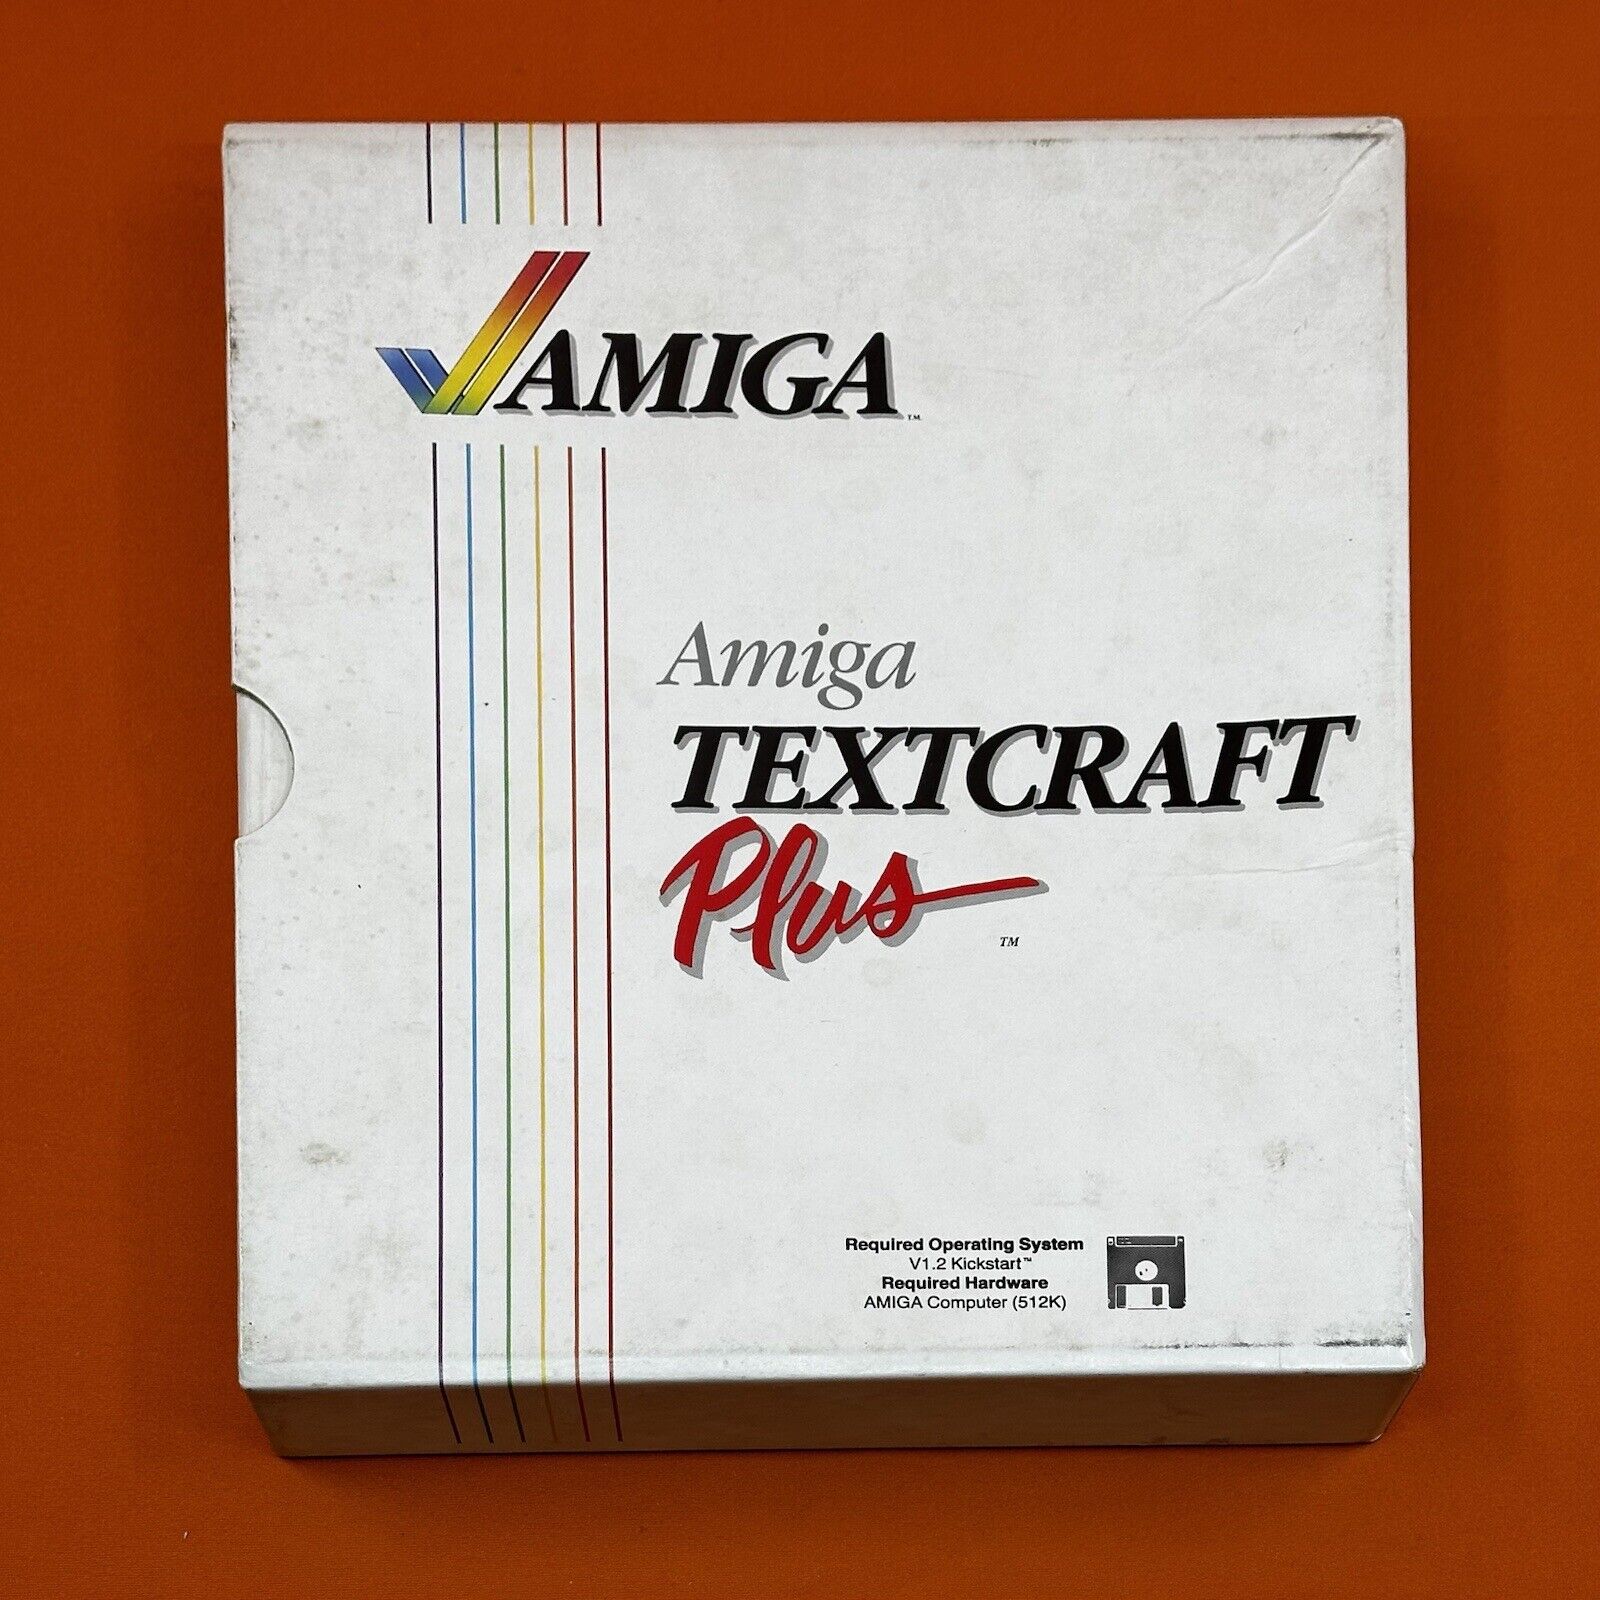 Amiga Textcraft Plus, Box, Binder Manual And Disk For Commodore Amiga Working